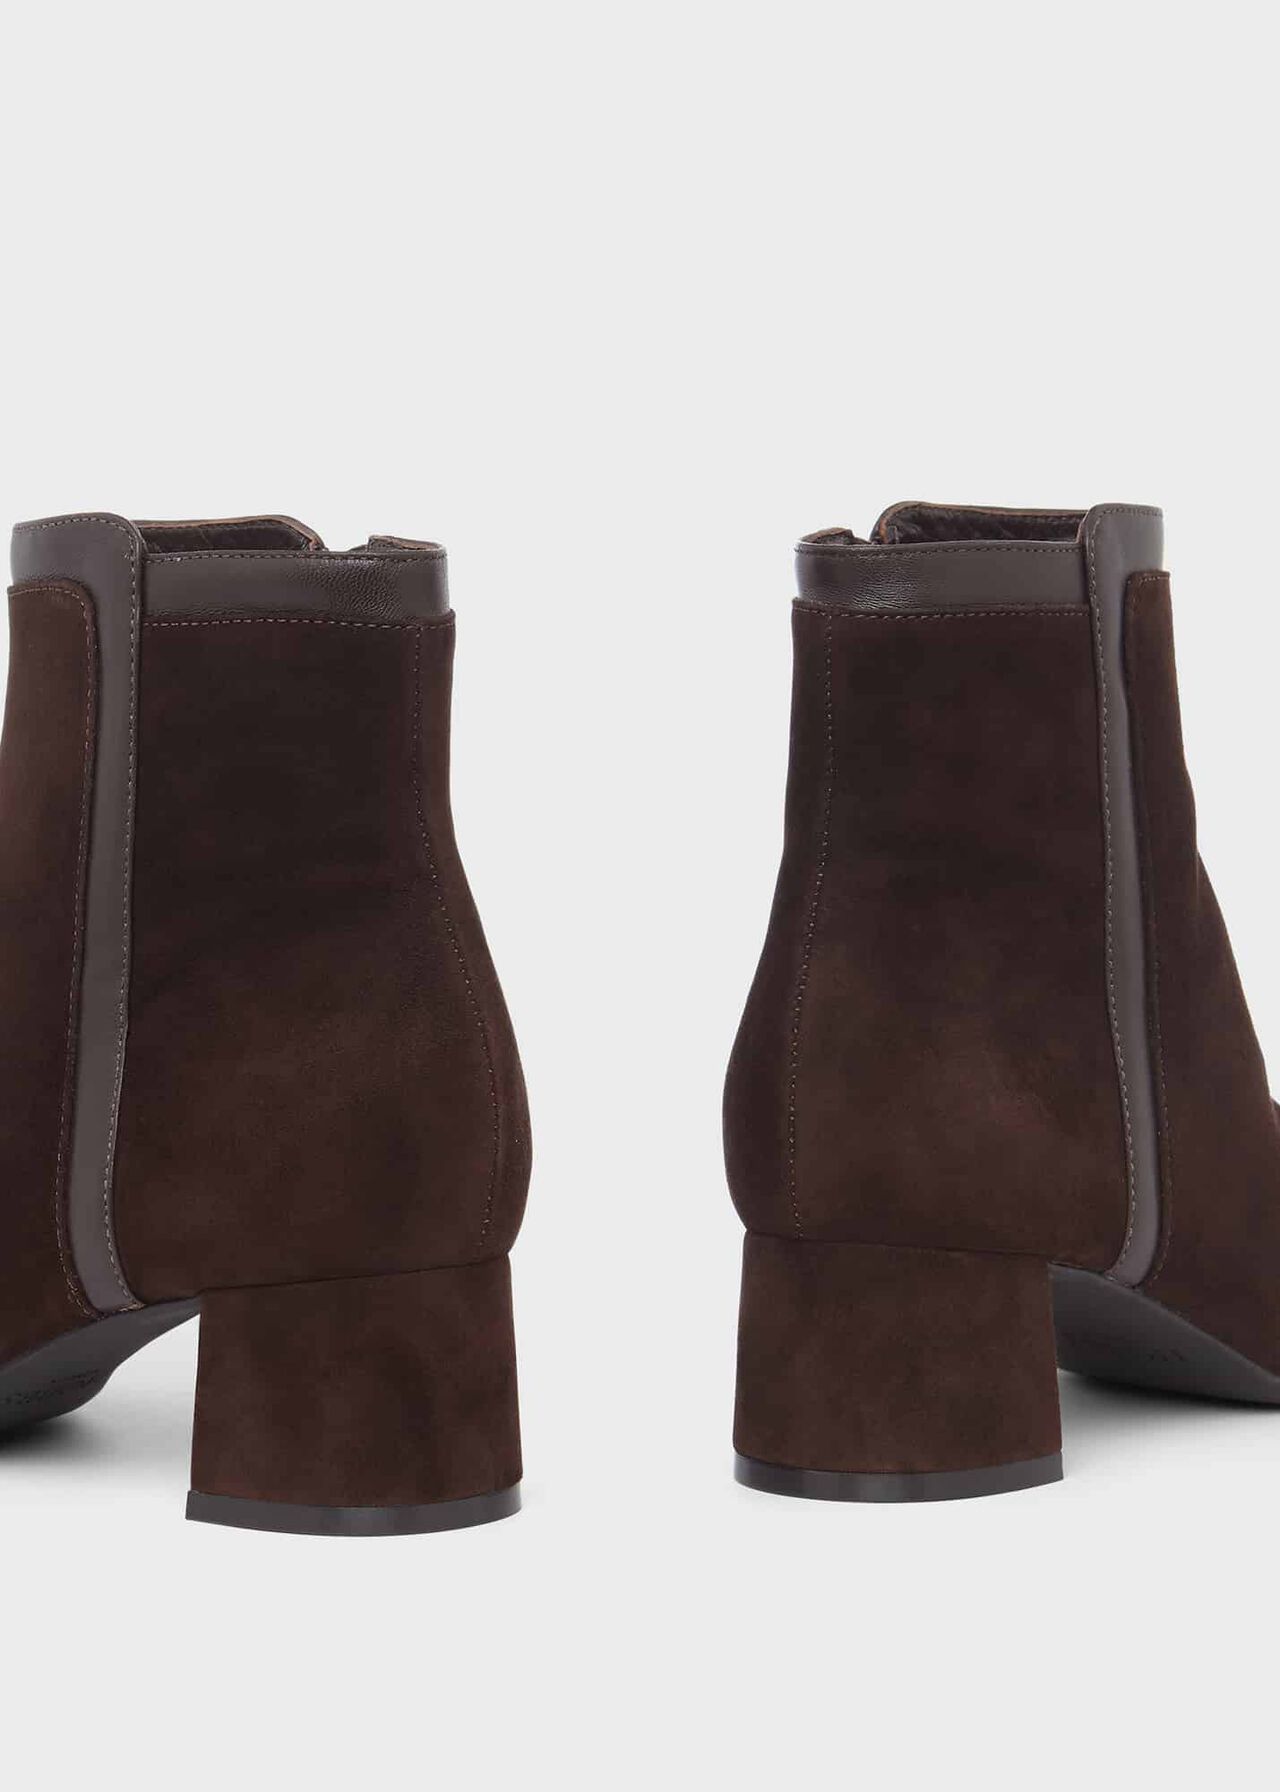 Iro Ankle Boots, Dark Brown, hi-res